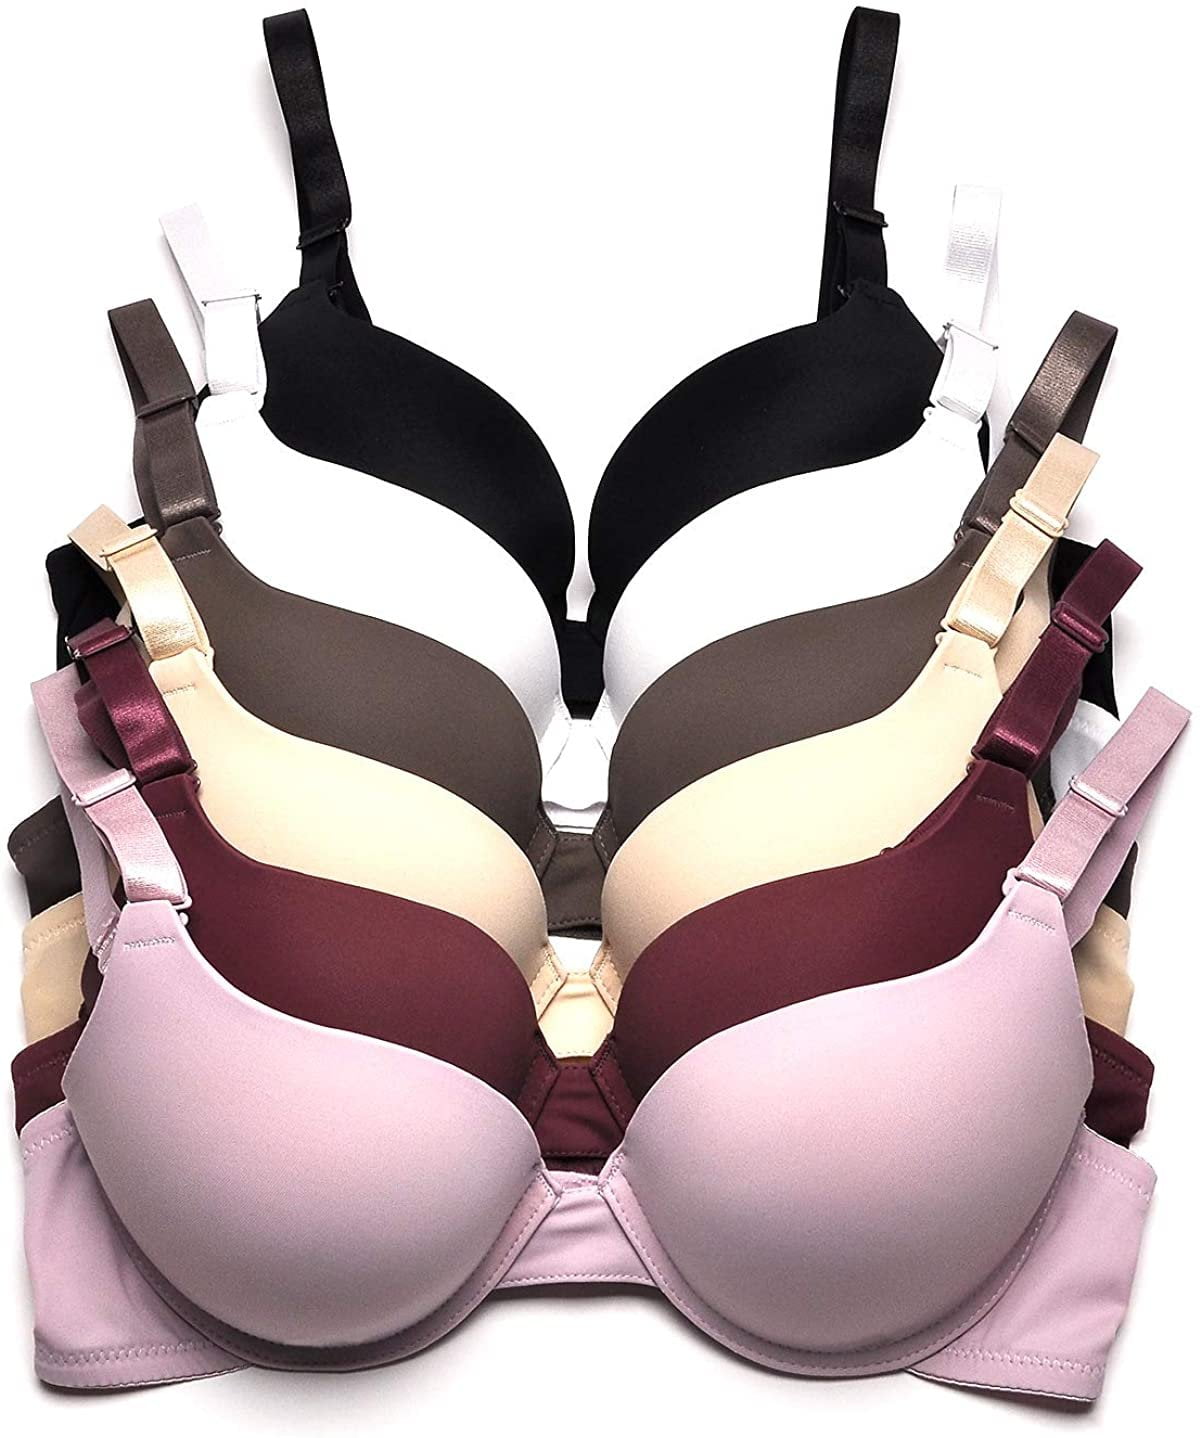 6 Pieces ADD 2 Cup Triple Maximum Lift Boost Cup Double Push Up Bra B/C (34B)  